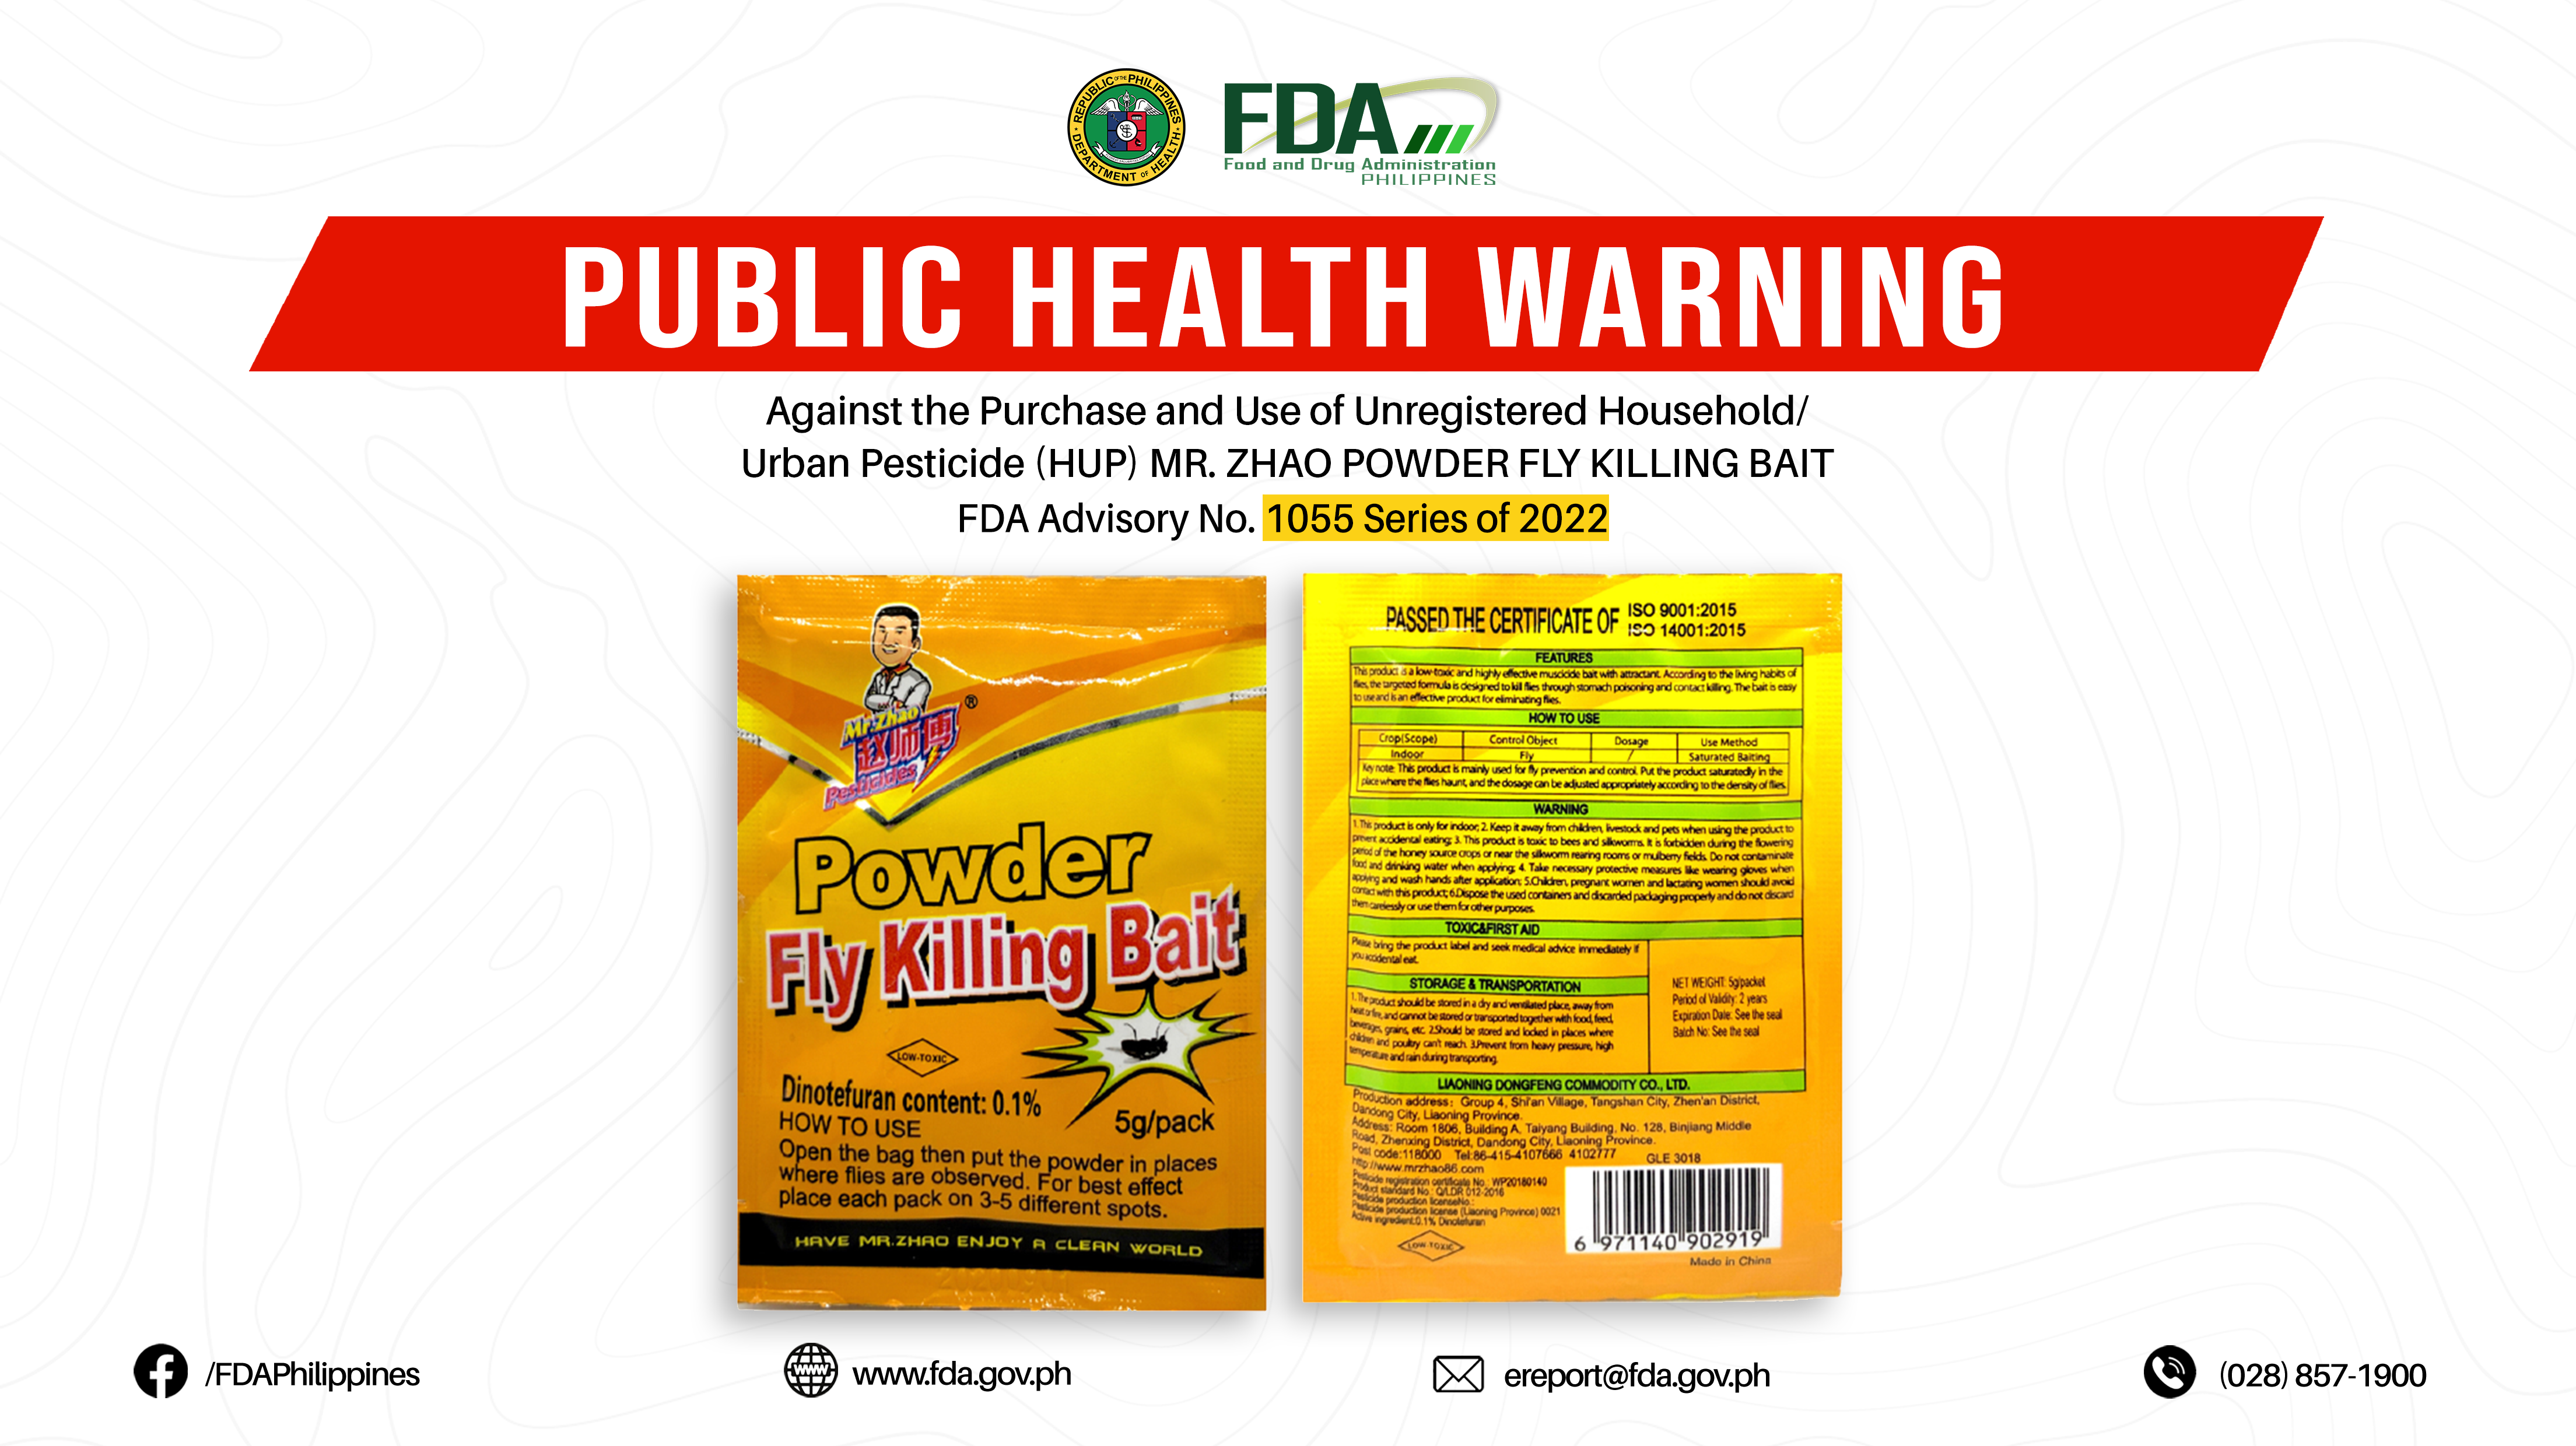 FDA Advisory No.2022-1055 || Public Health Warning Against the Purchase and Use of Unregistered Household/Urban Pesticide (HUP) MR. ZHAO POWDER FLY KILLING BAIT